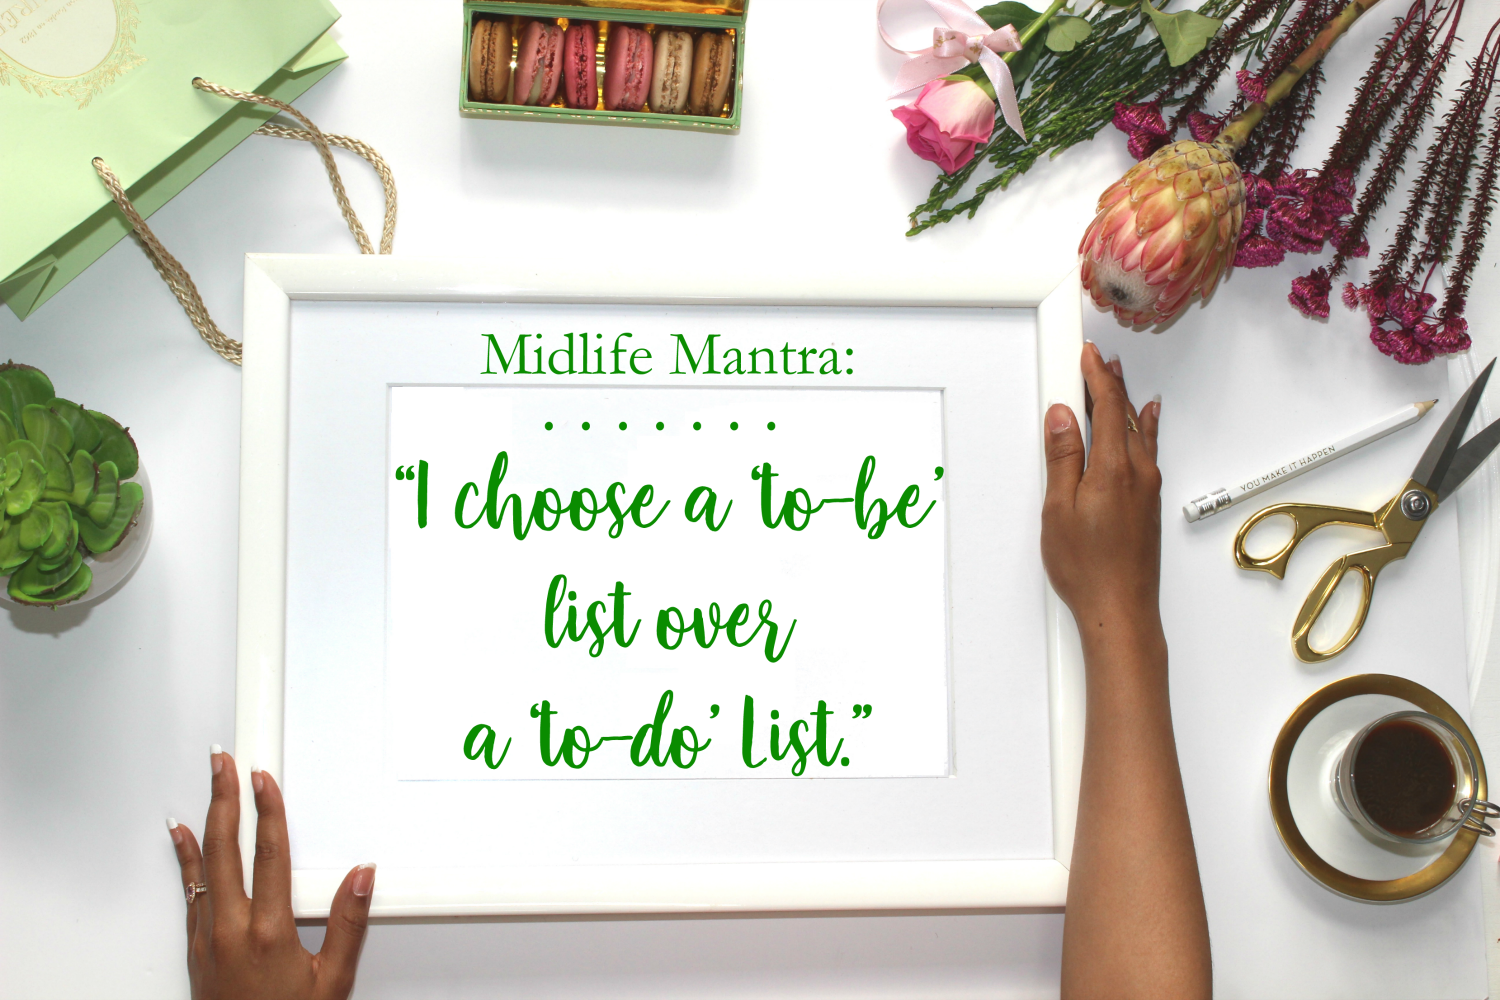 MIDLIFE MANTRA: To-Be Over To-Do